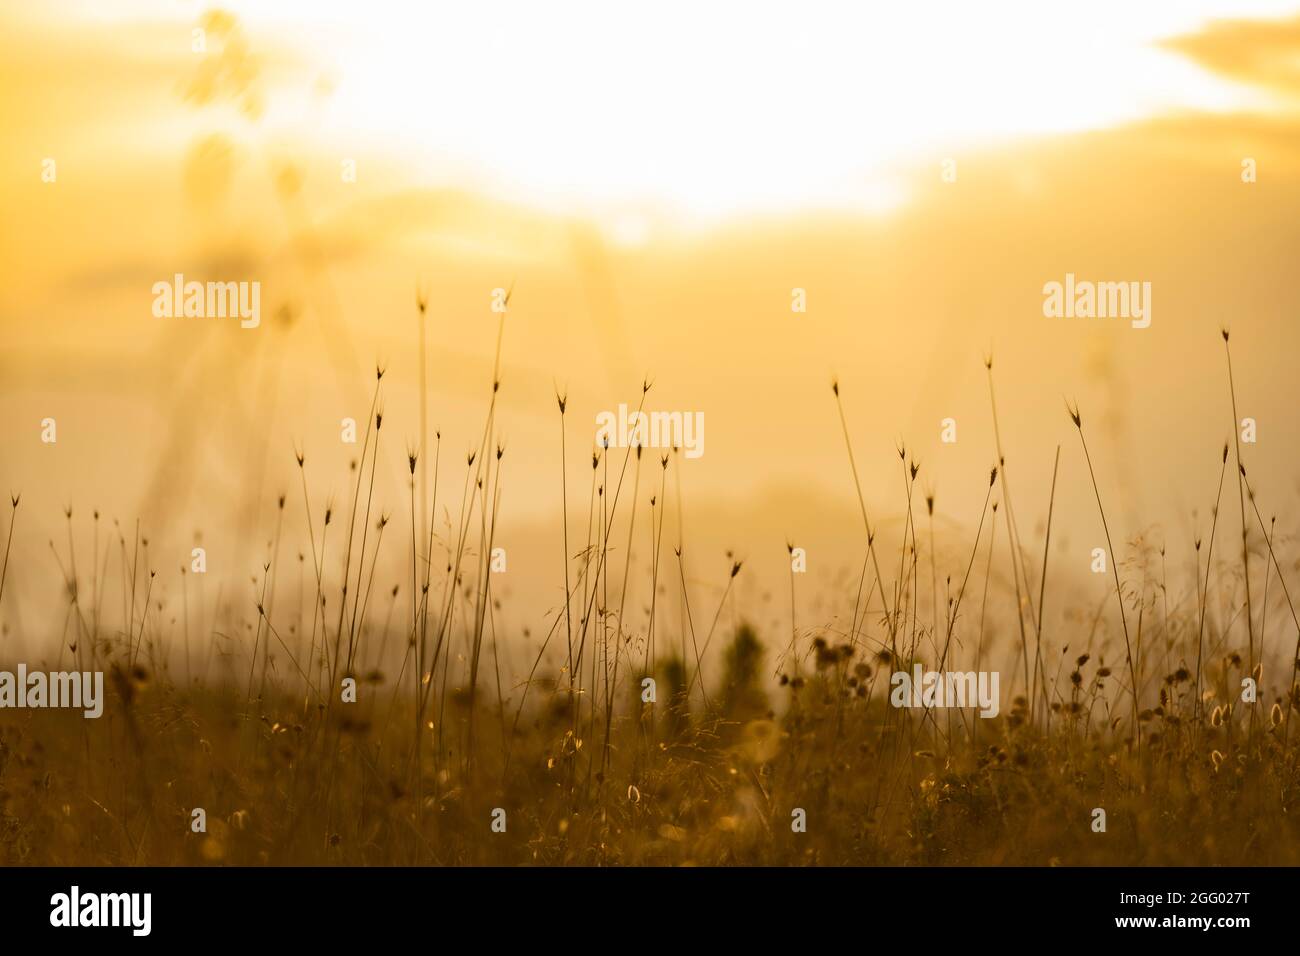 Soft focus of grass and wild plants illuminated by a golden sunset. Spring, summer season, natural background with copy space. Stock Photo